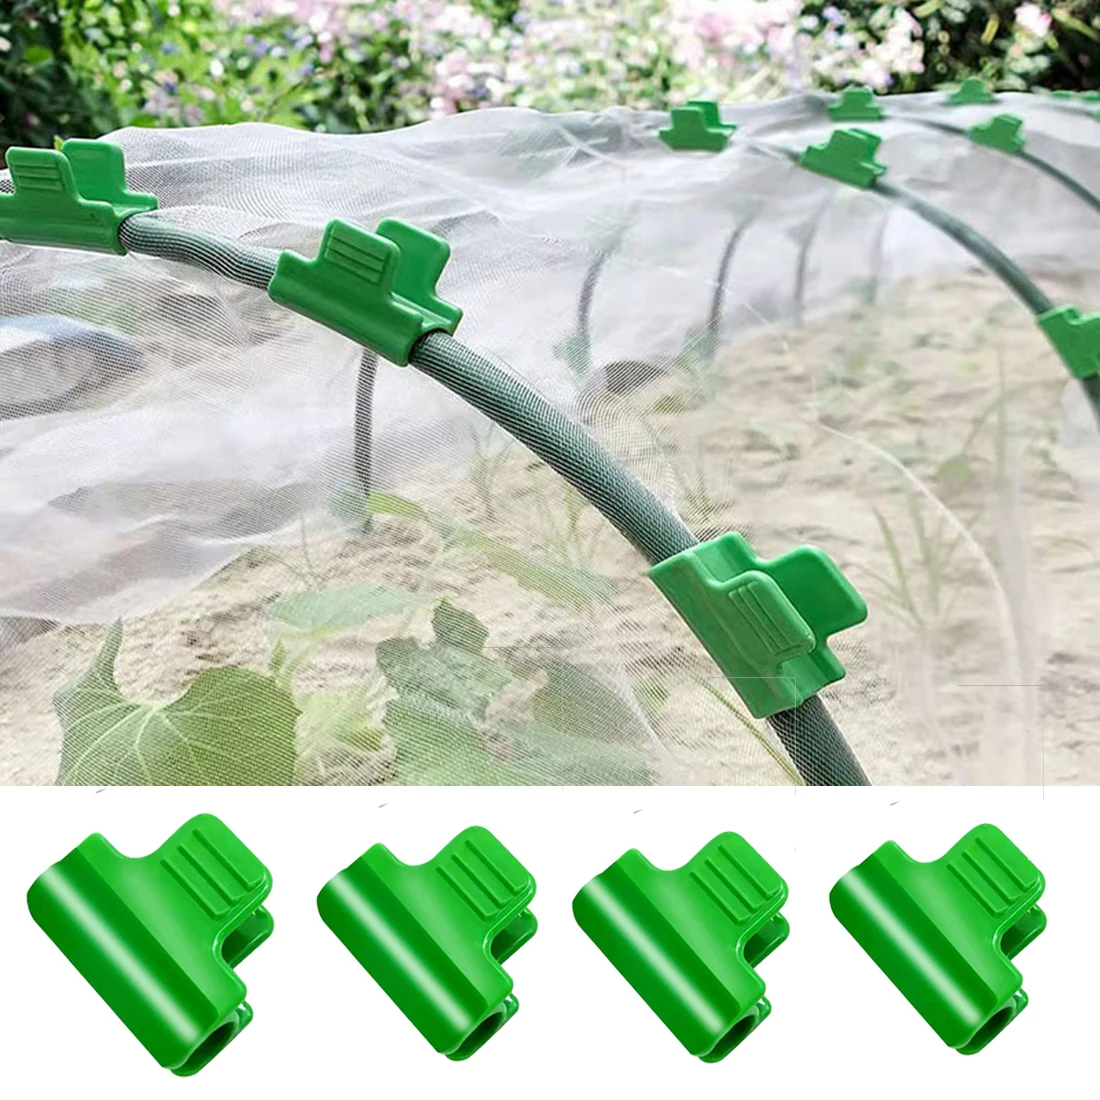 

10PCS Greenhouse Film Clamps Garden Shed Row Cover Netting Tunnel Hoop Plastic Clips For Outer Diameter 8/11/16cm Plant Stakes